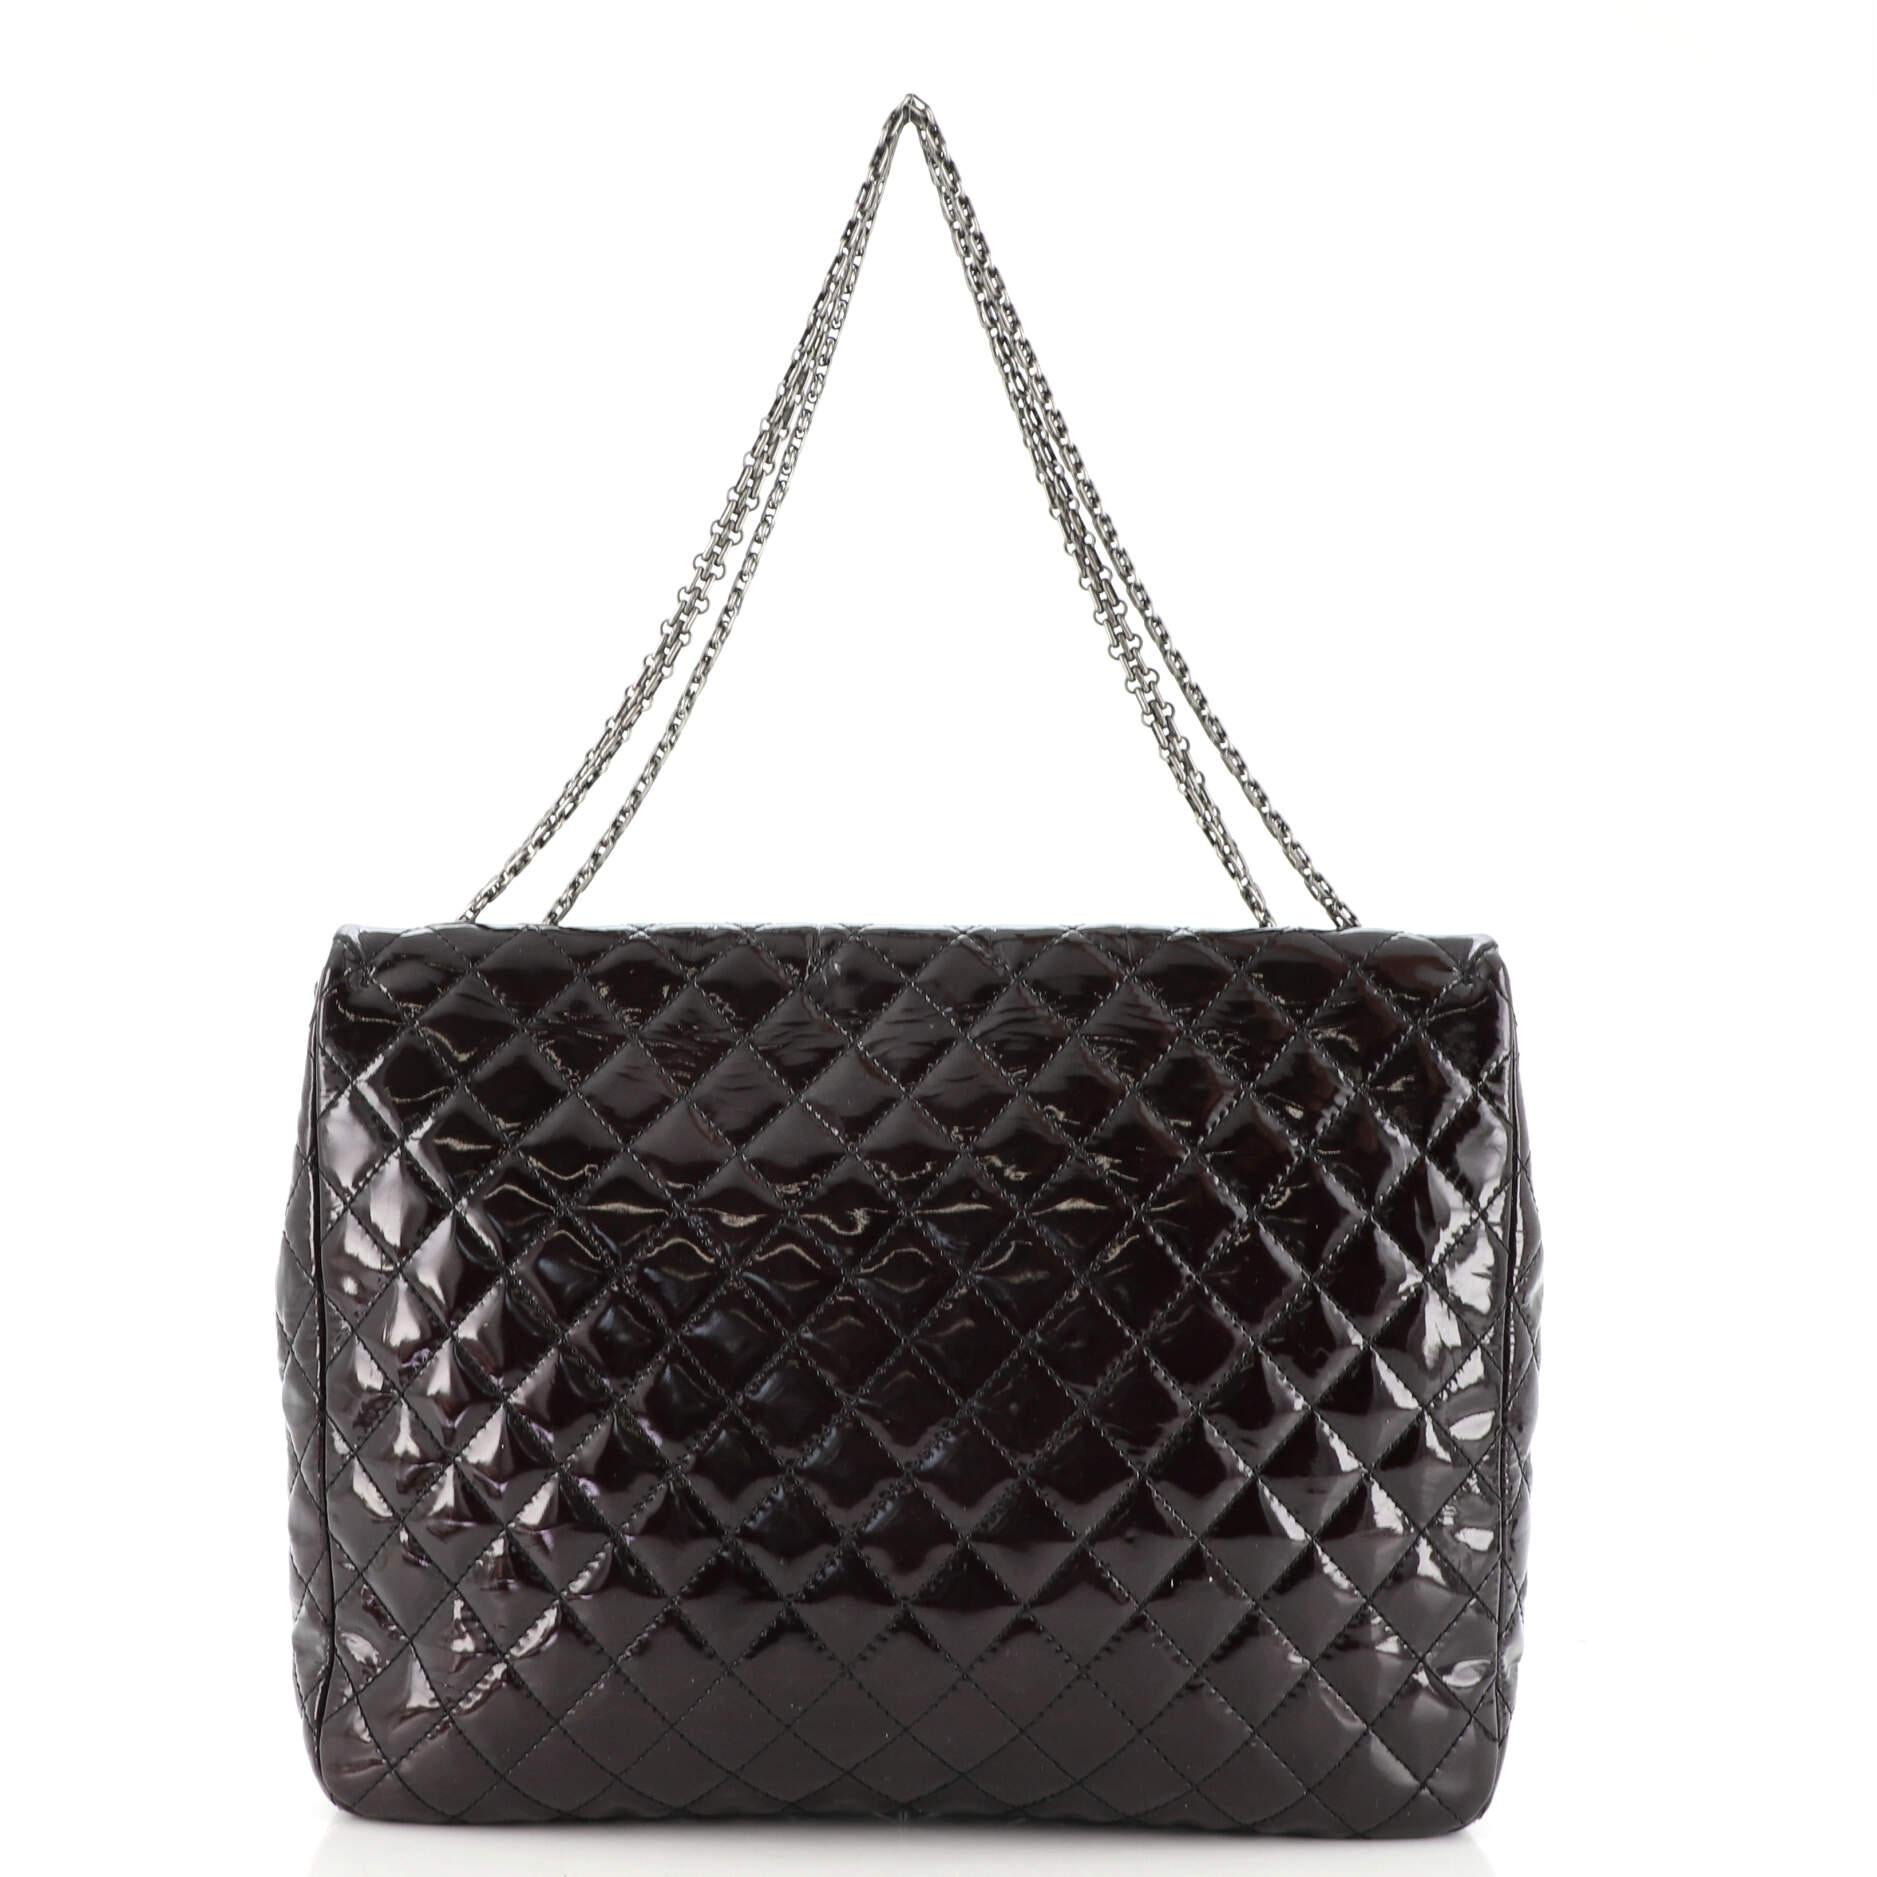 Black Chanel Reissue Flap Bag Quilted Patent XL